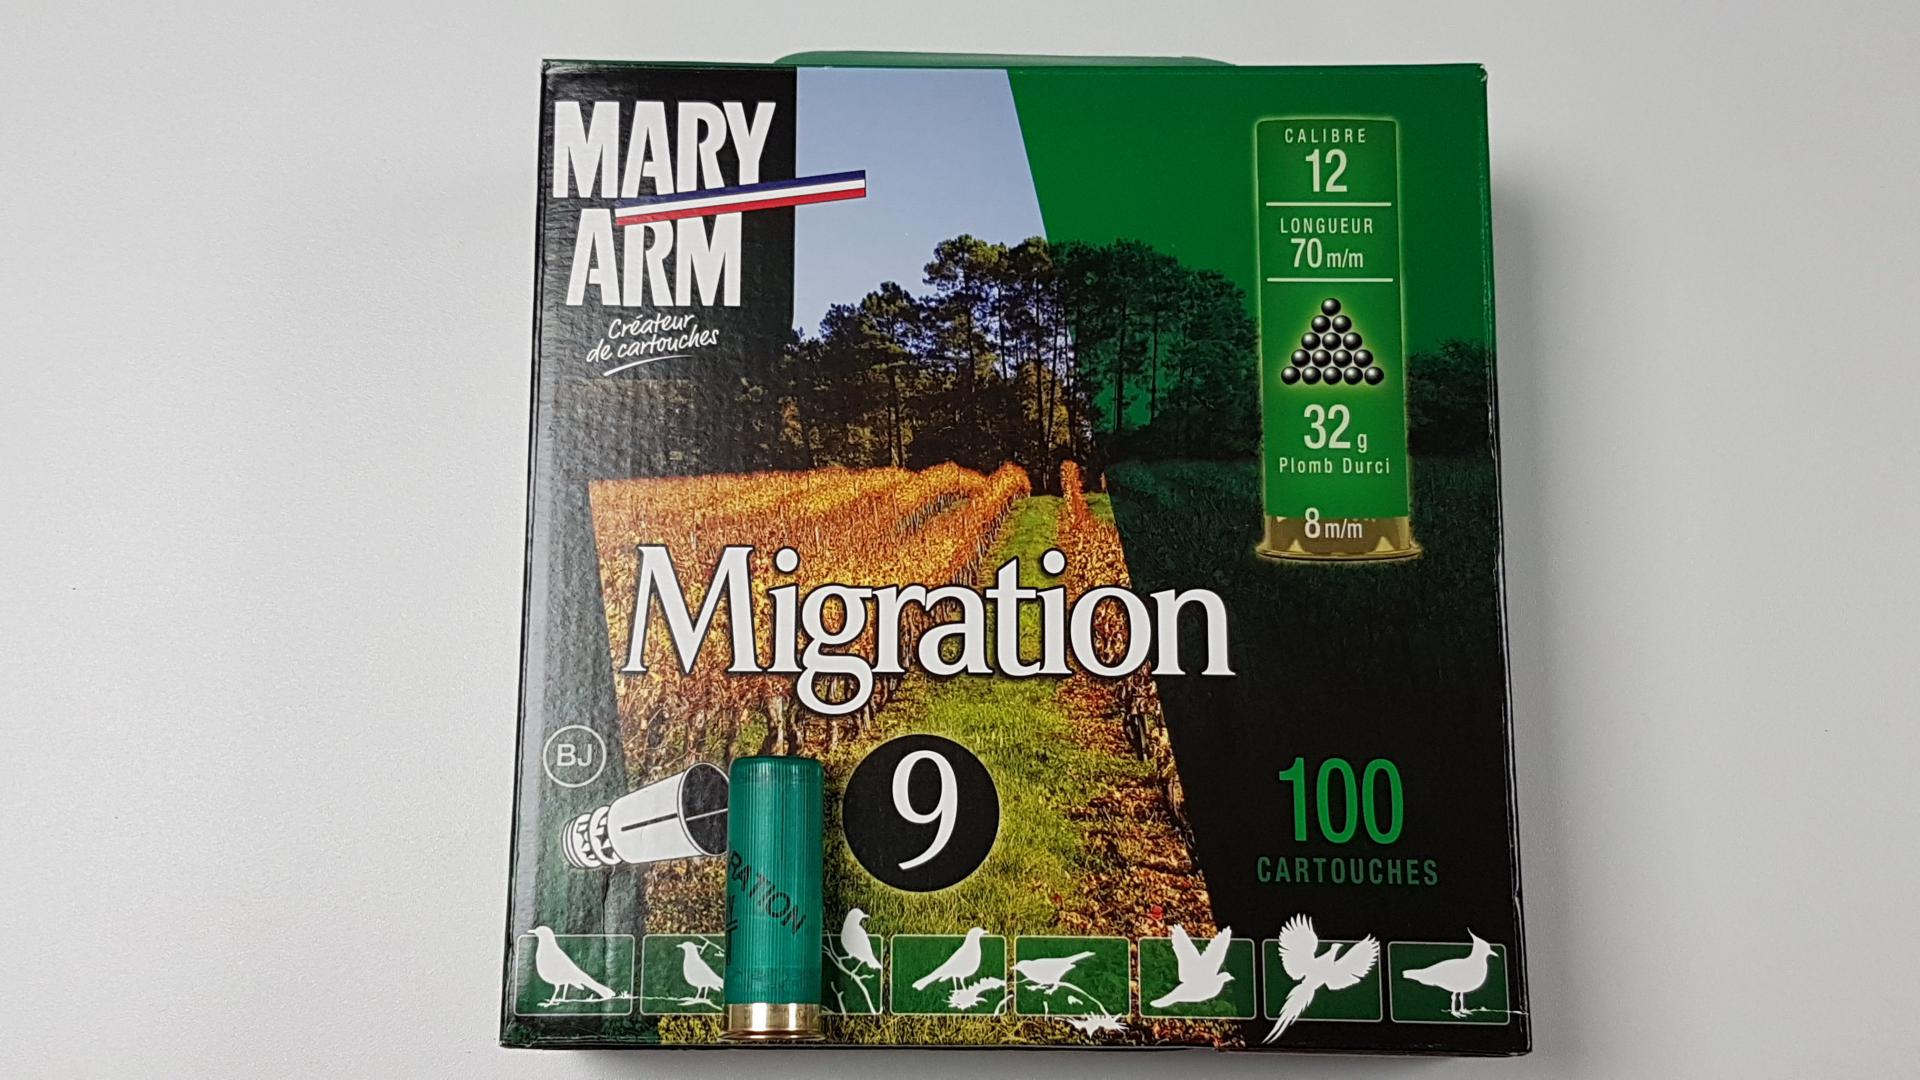 CARTOUCHES MARY ARM MIGRATION CAL 12/70